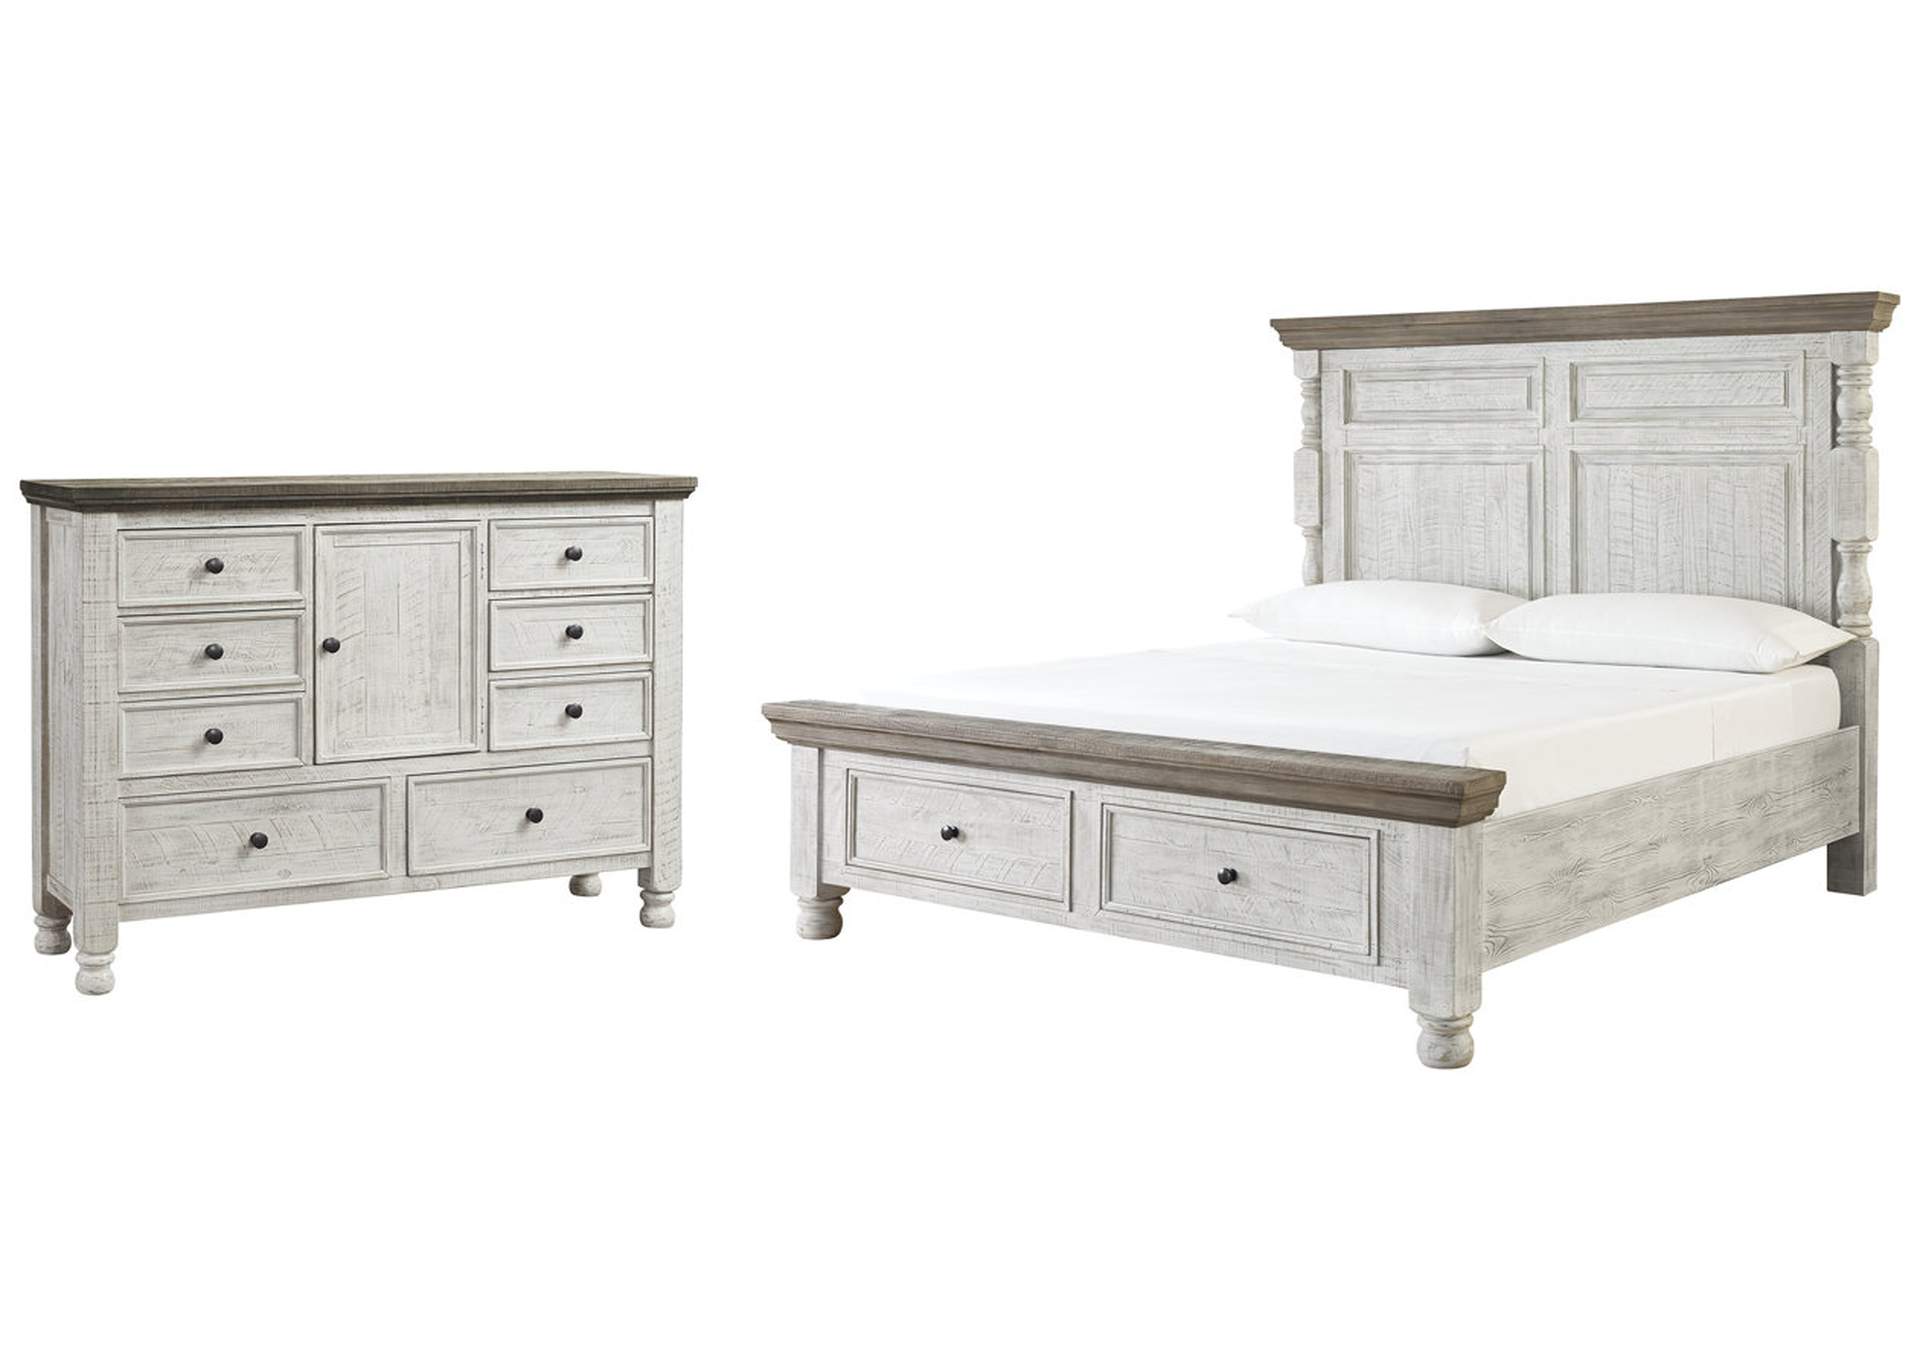 Havalance King Poster Bed with 2 Storage Drawers with Dresser,Millennium